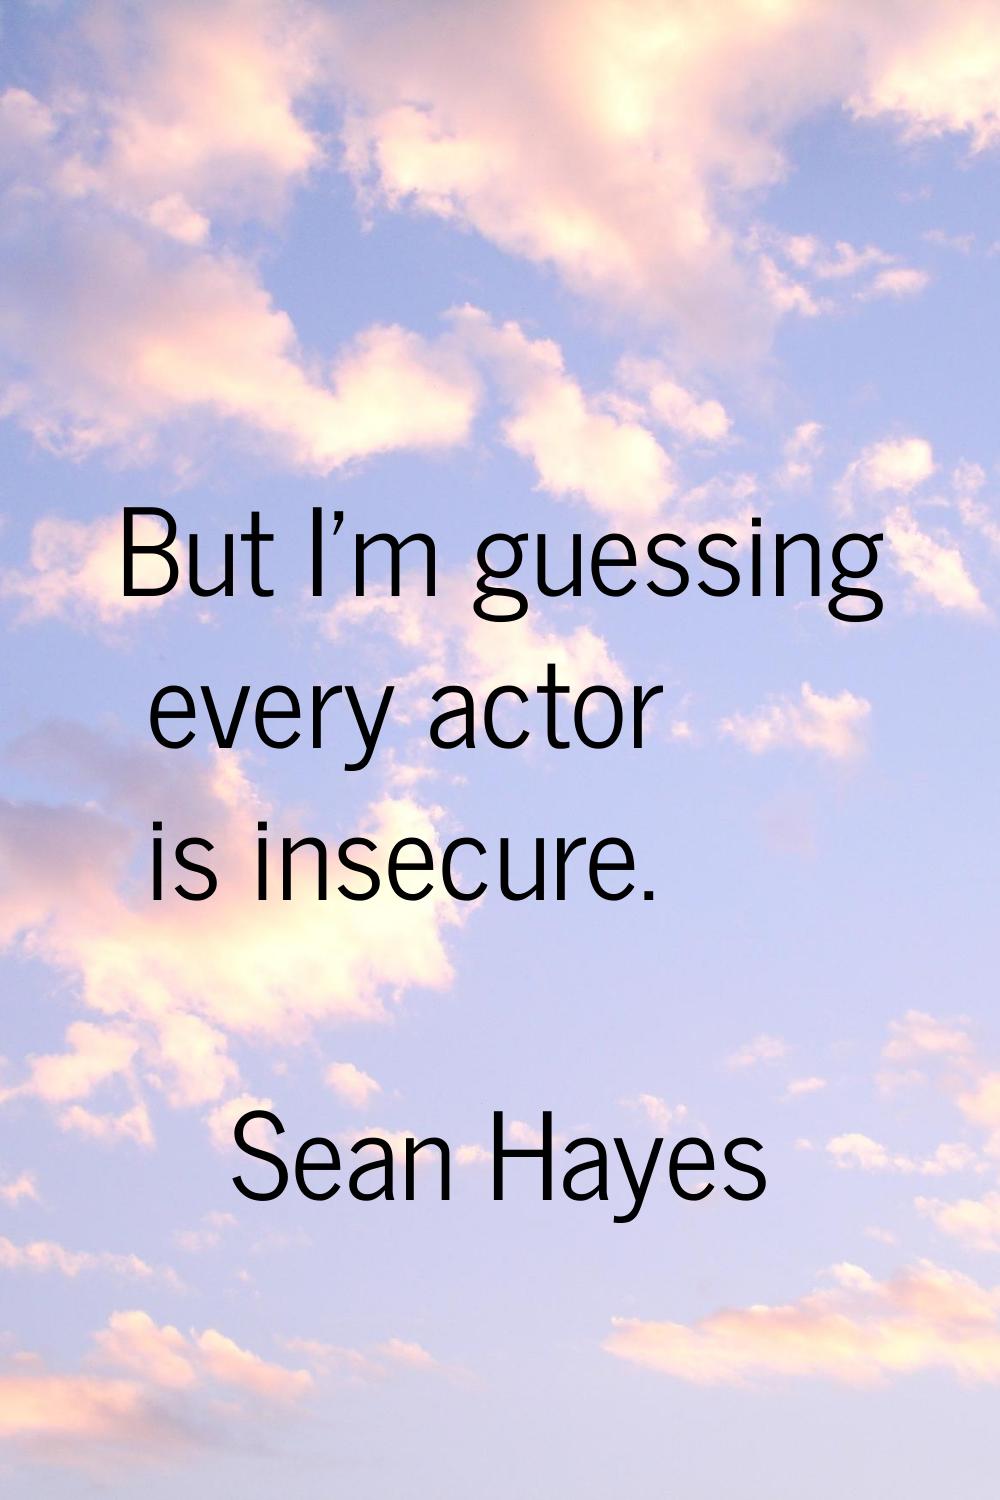 But I'm guessing every actor is insecure.